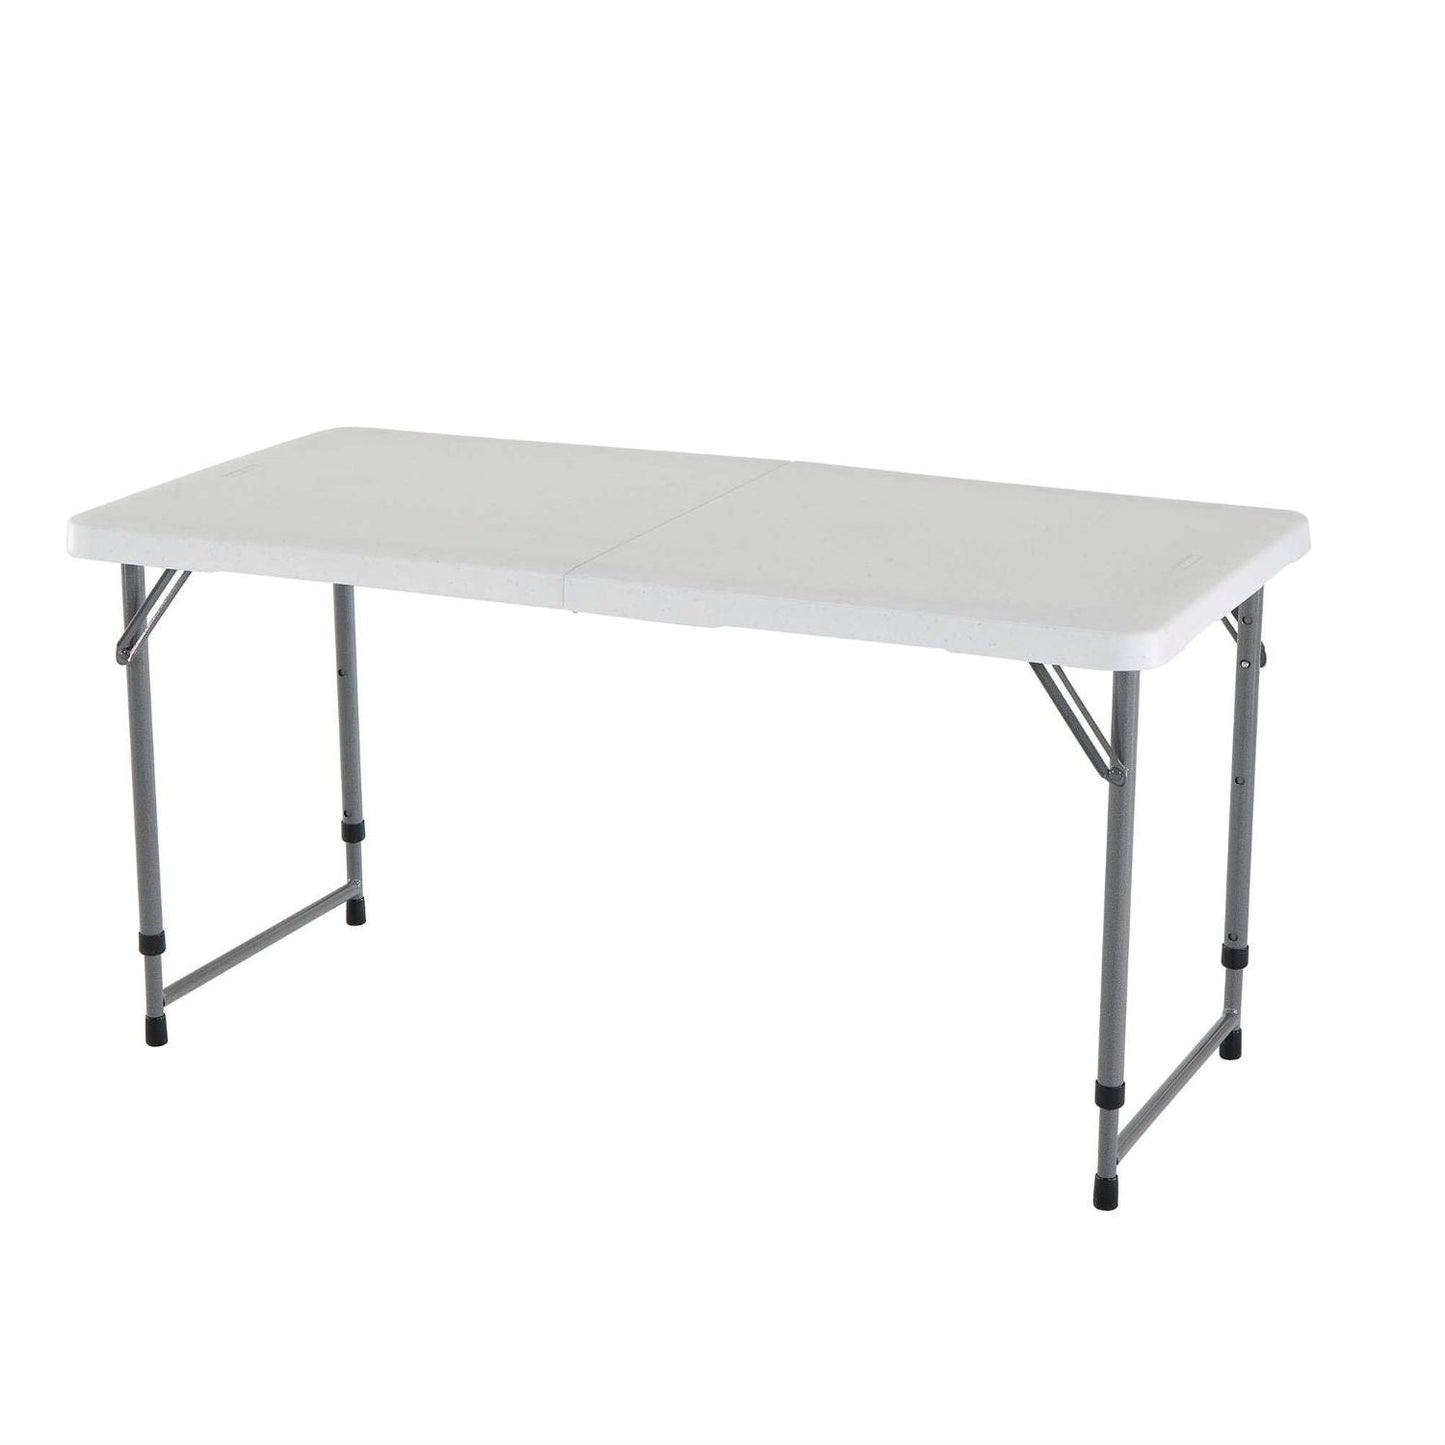 Office > Folding Tables - Adjustable Height White HDPE Folding Table With Powder Coated Steel Frame